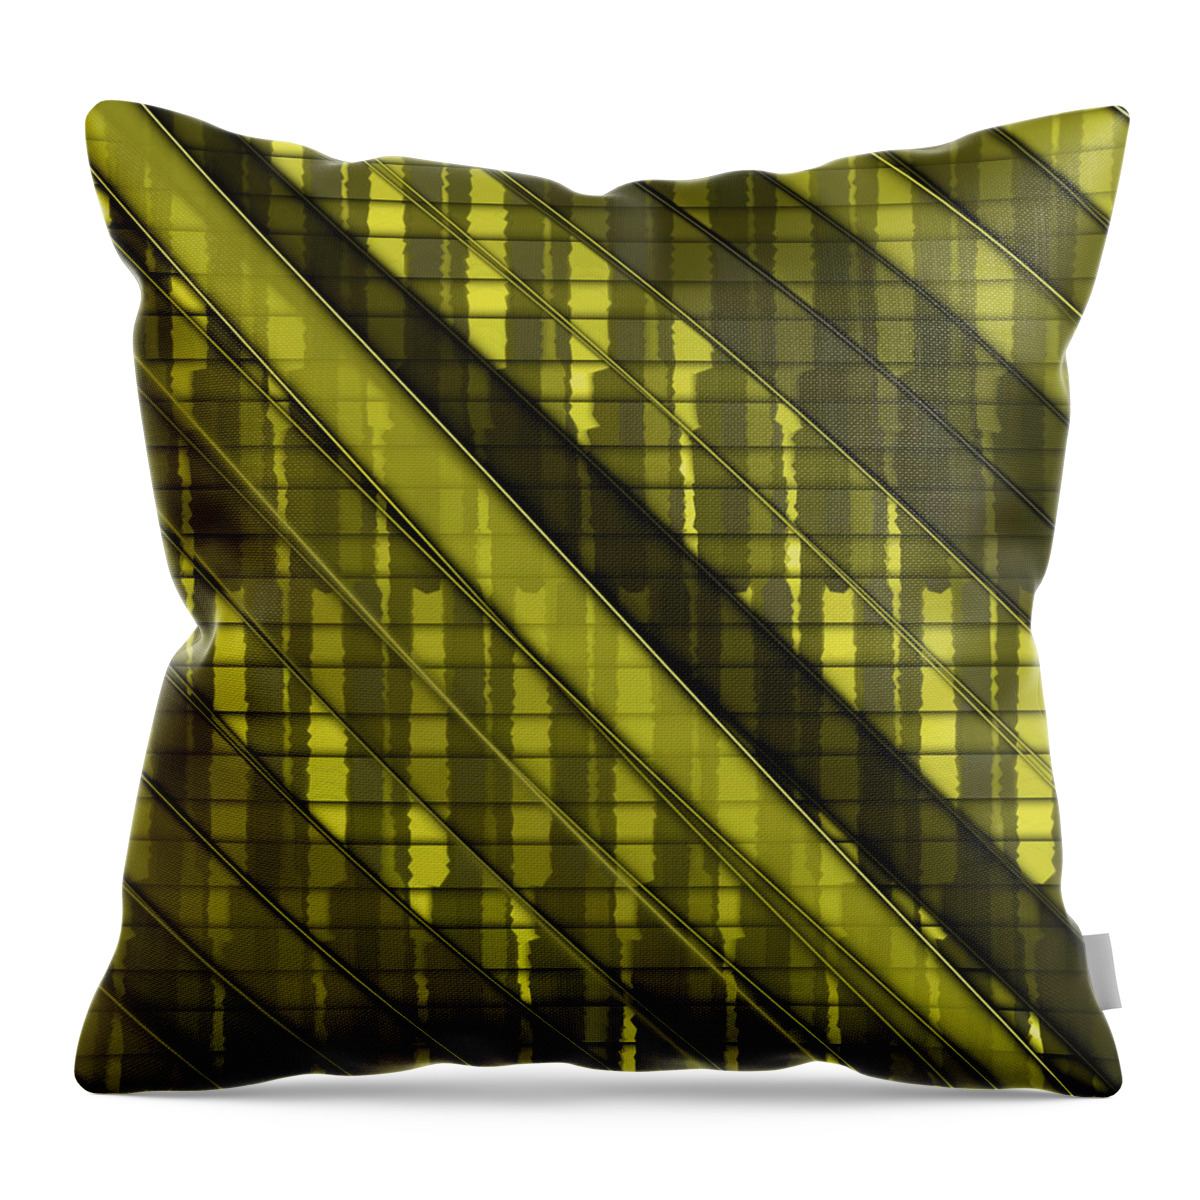 Abstract Throw Pillow featuring the digital art Pattern 55 #1 by Marko Sabotin